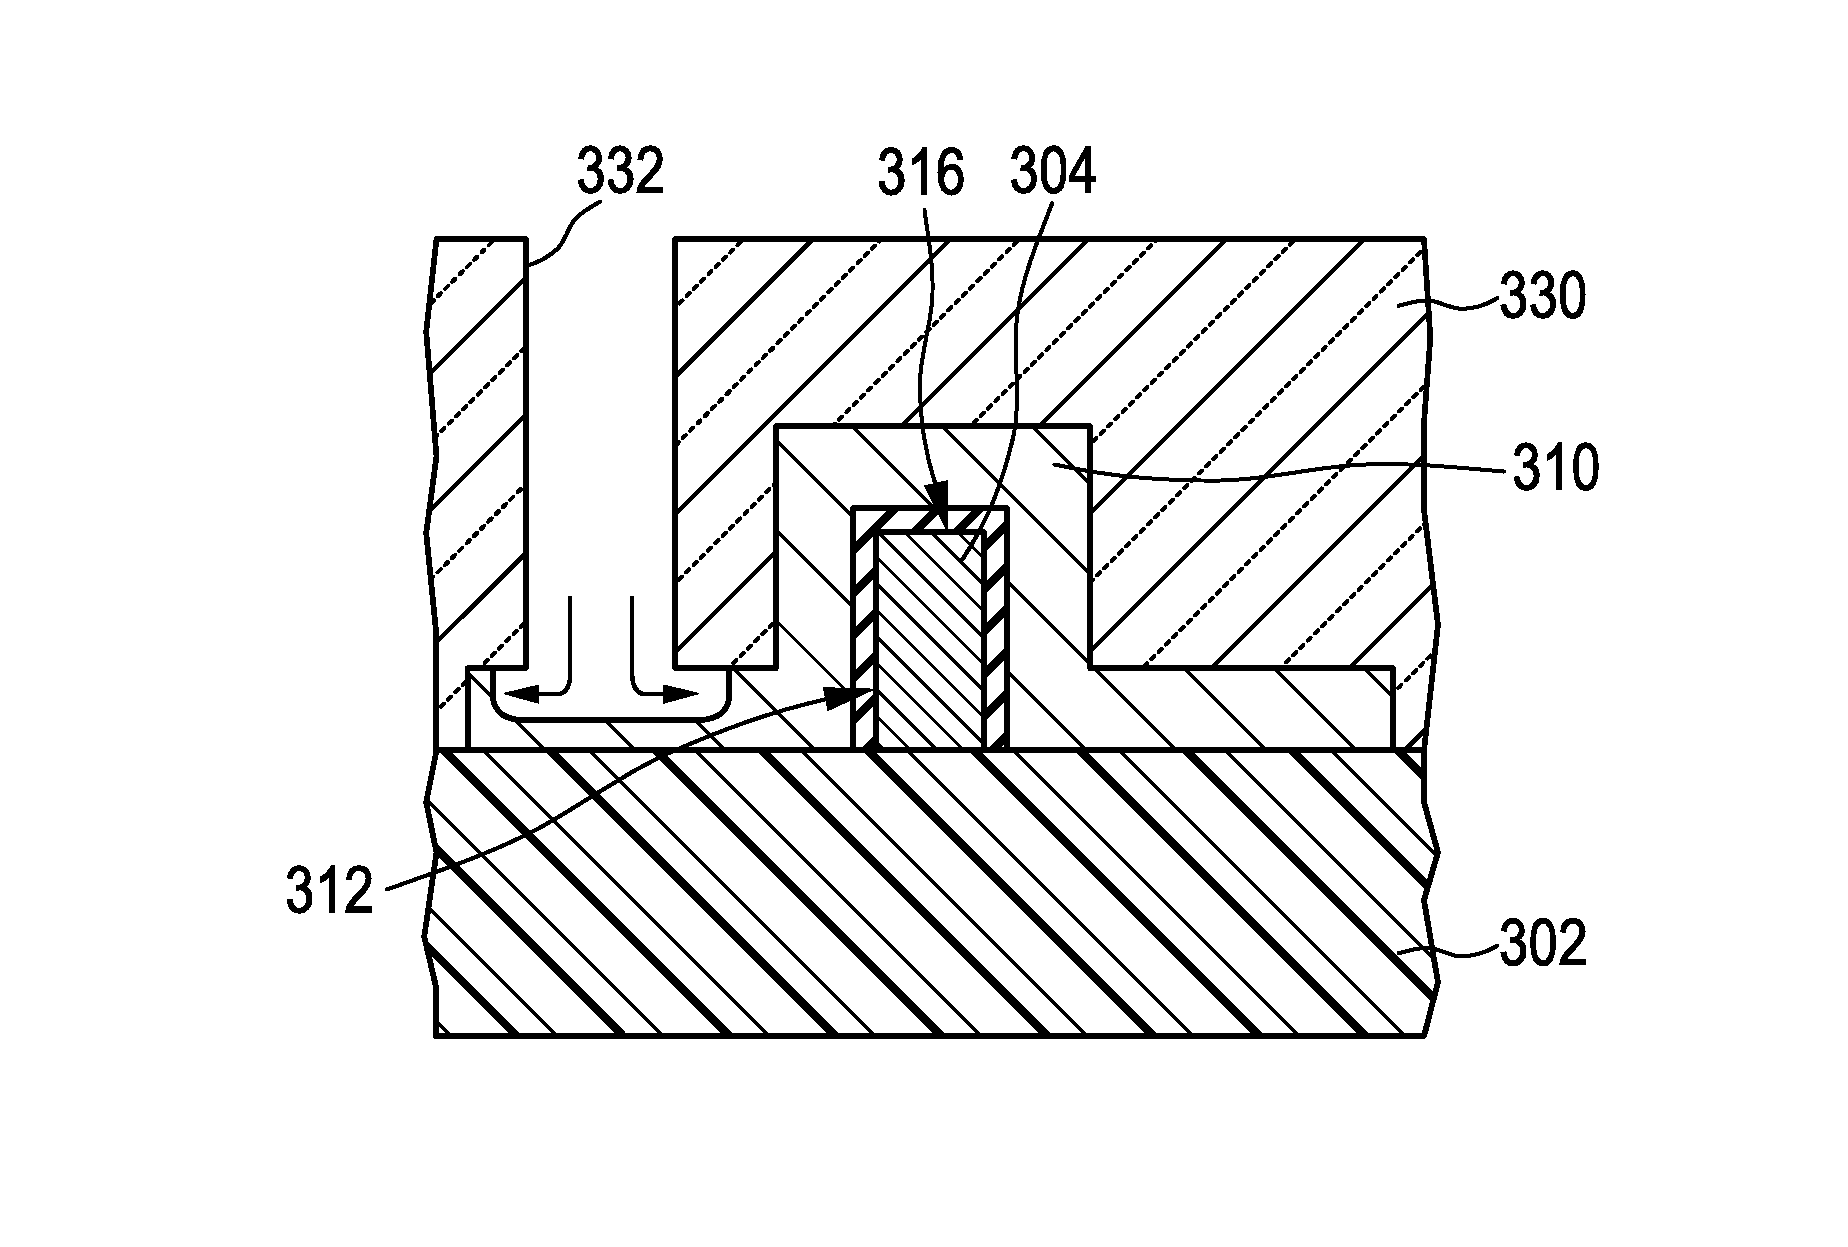 FinFET with separate gates and method for fabricating a finFET with separate gates